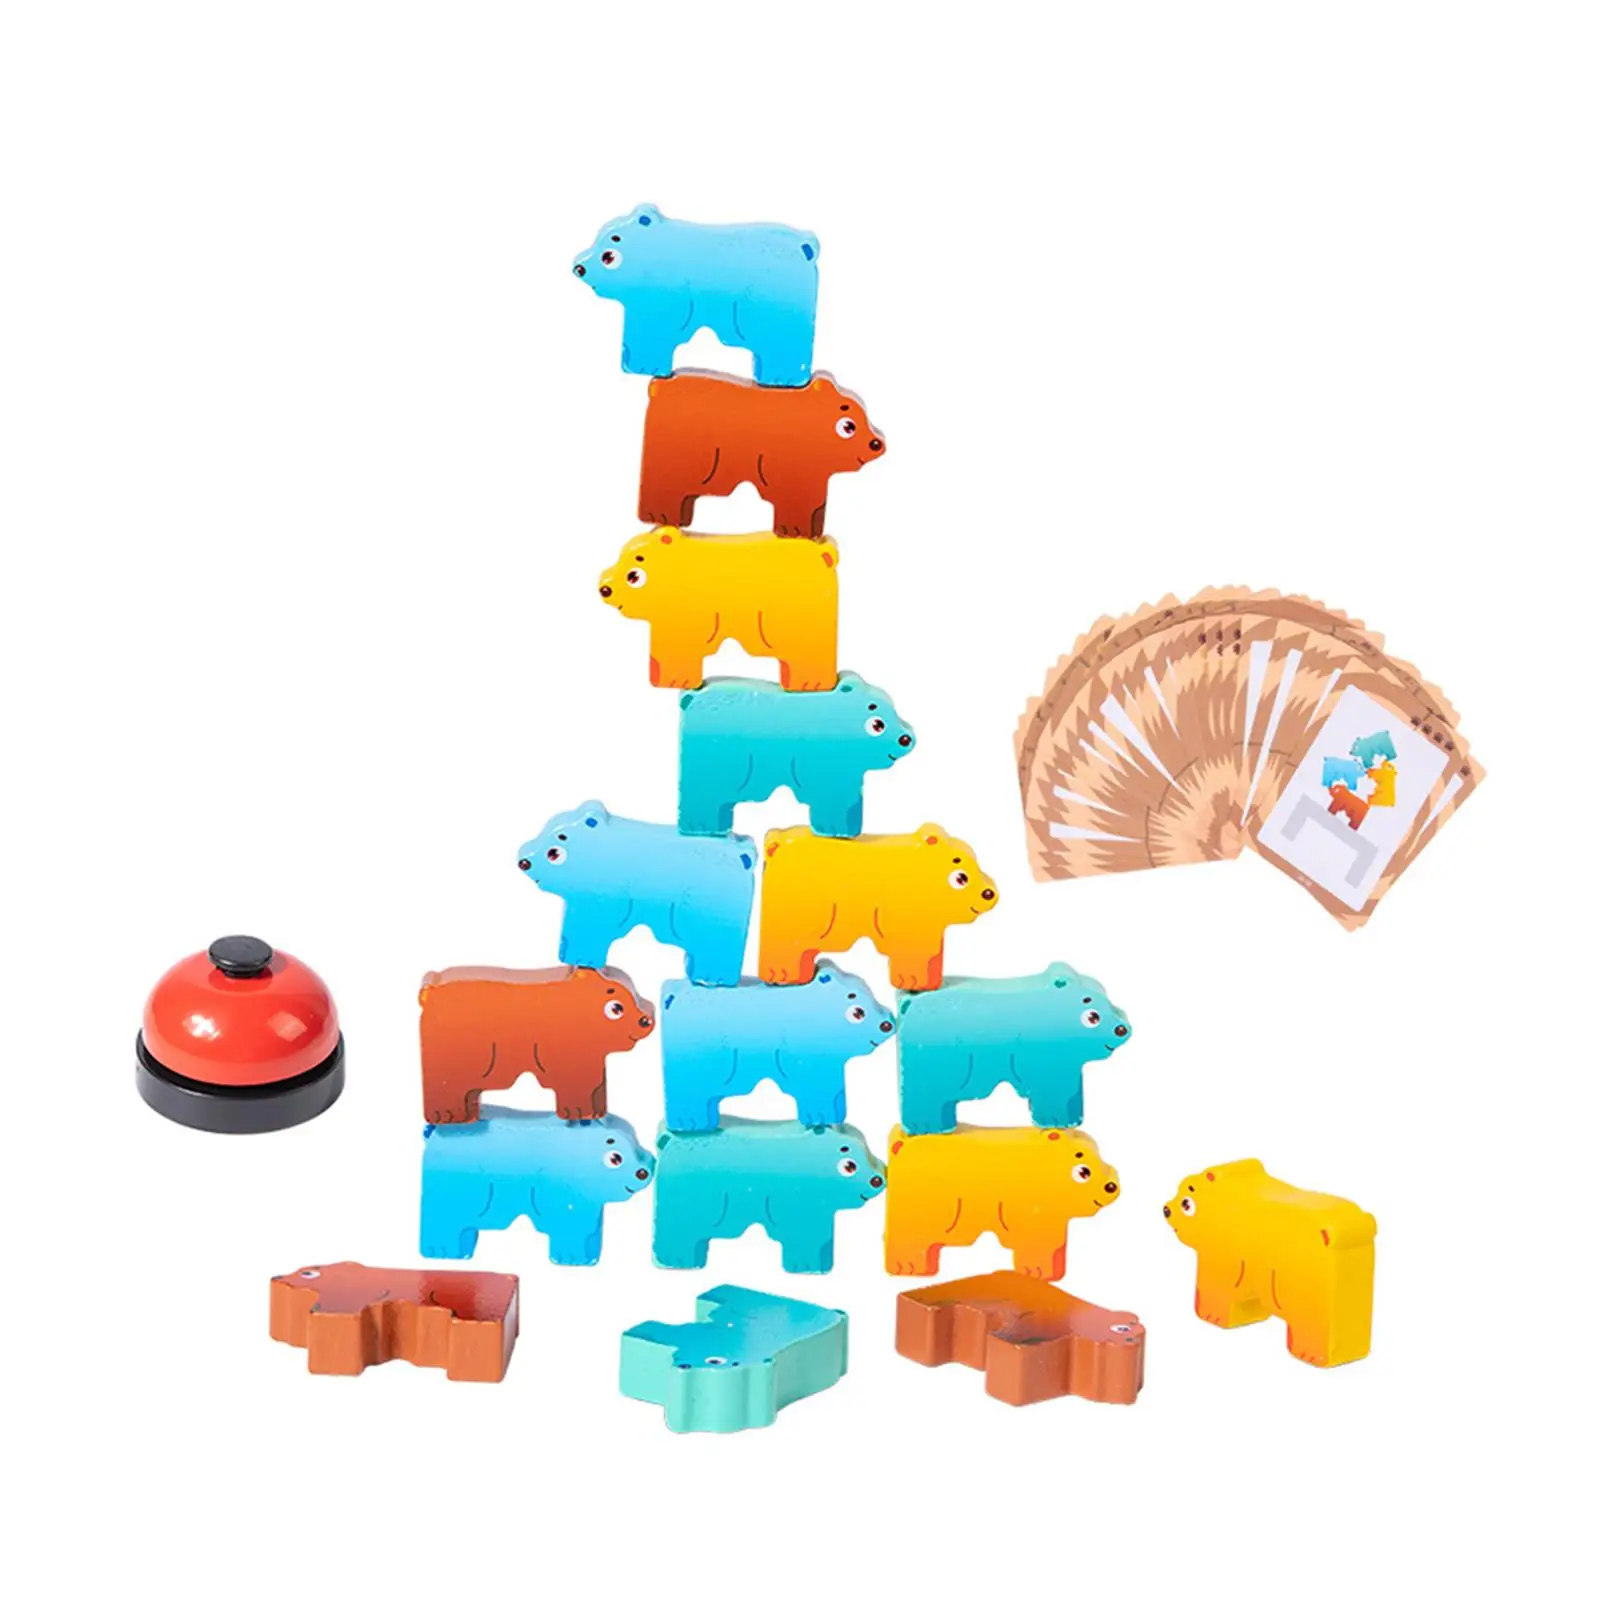 Wooden Stacking Toy Learning Building Toys Fine Motor Skill Activities Balance Game for Kids Boys Children Girls Birthday Gift